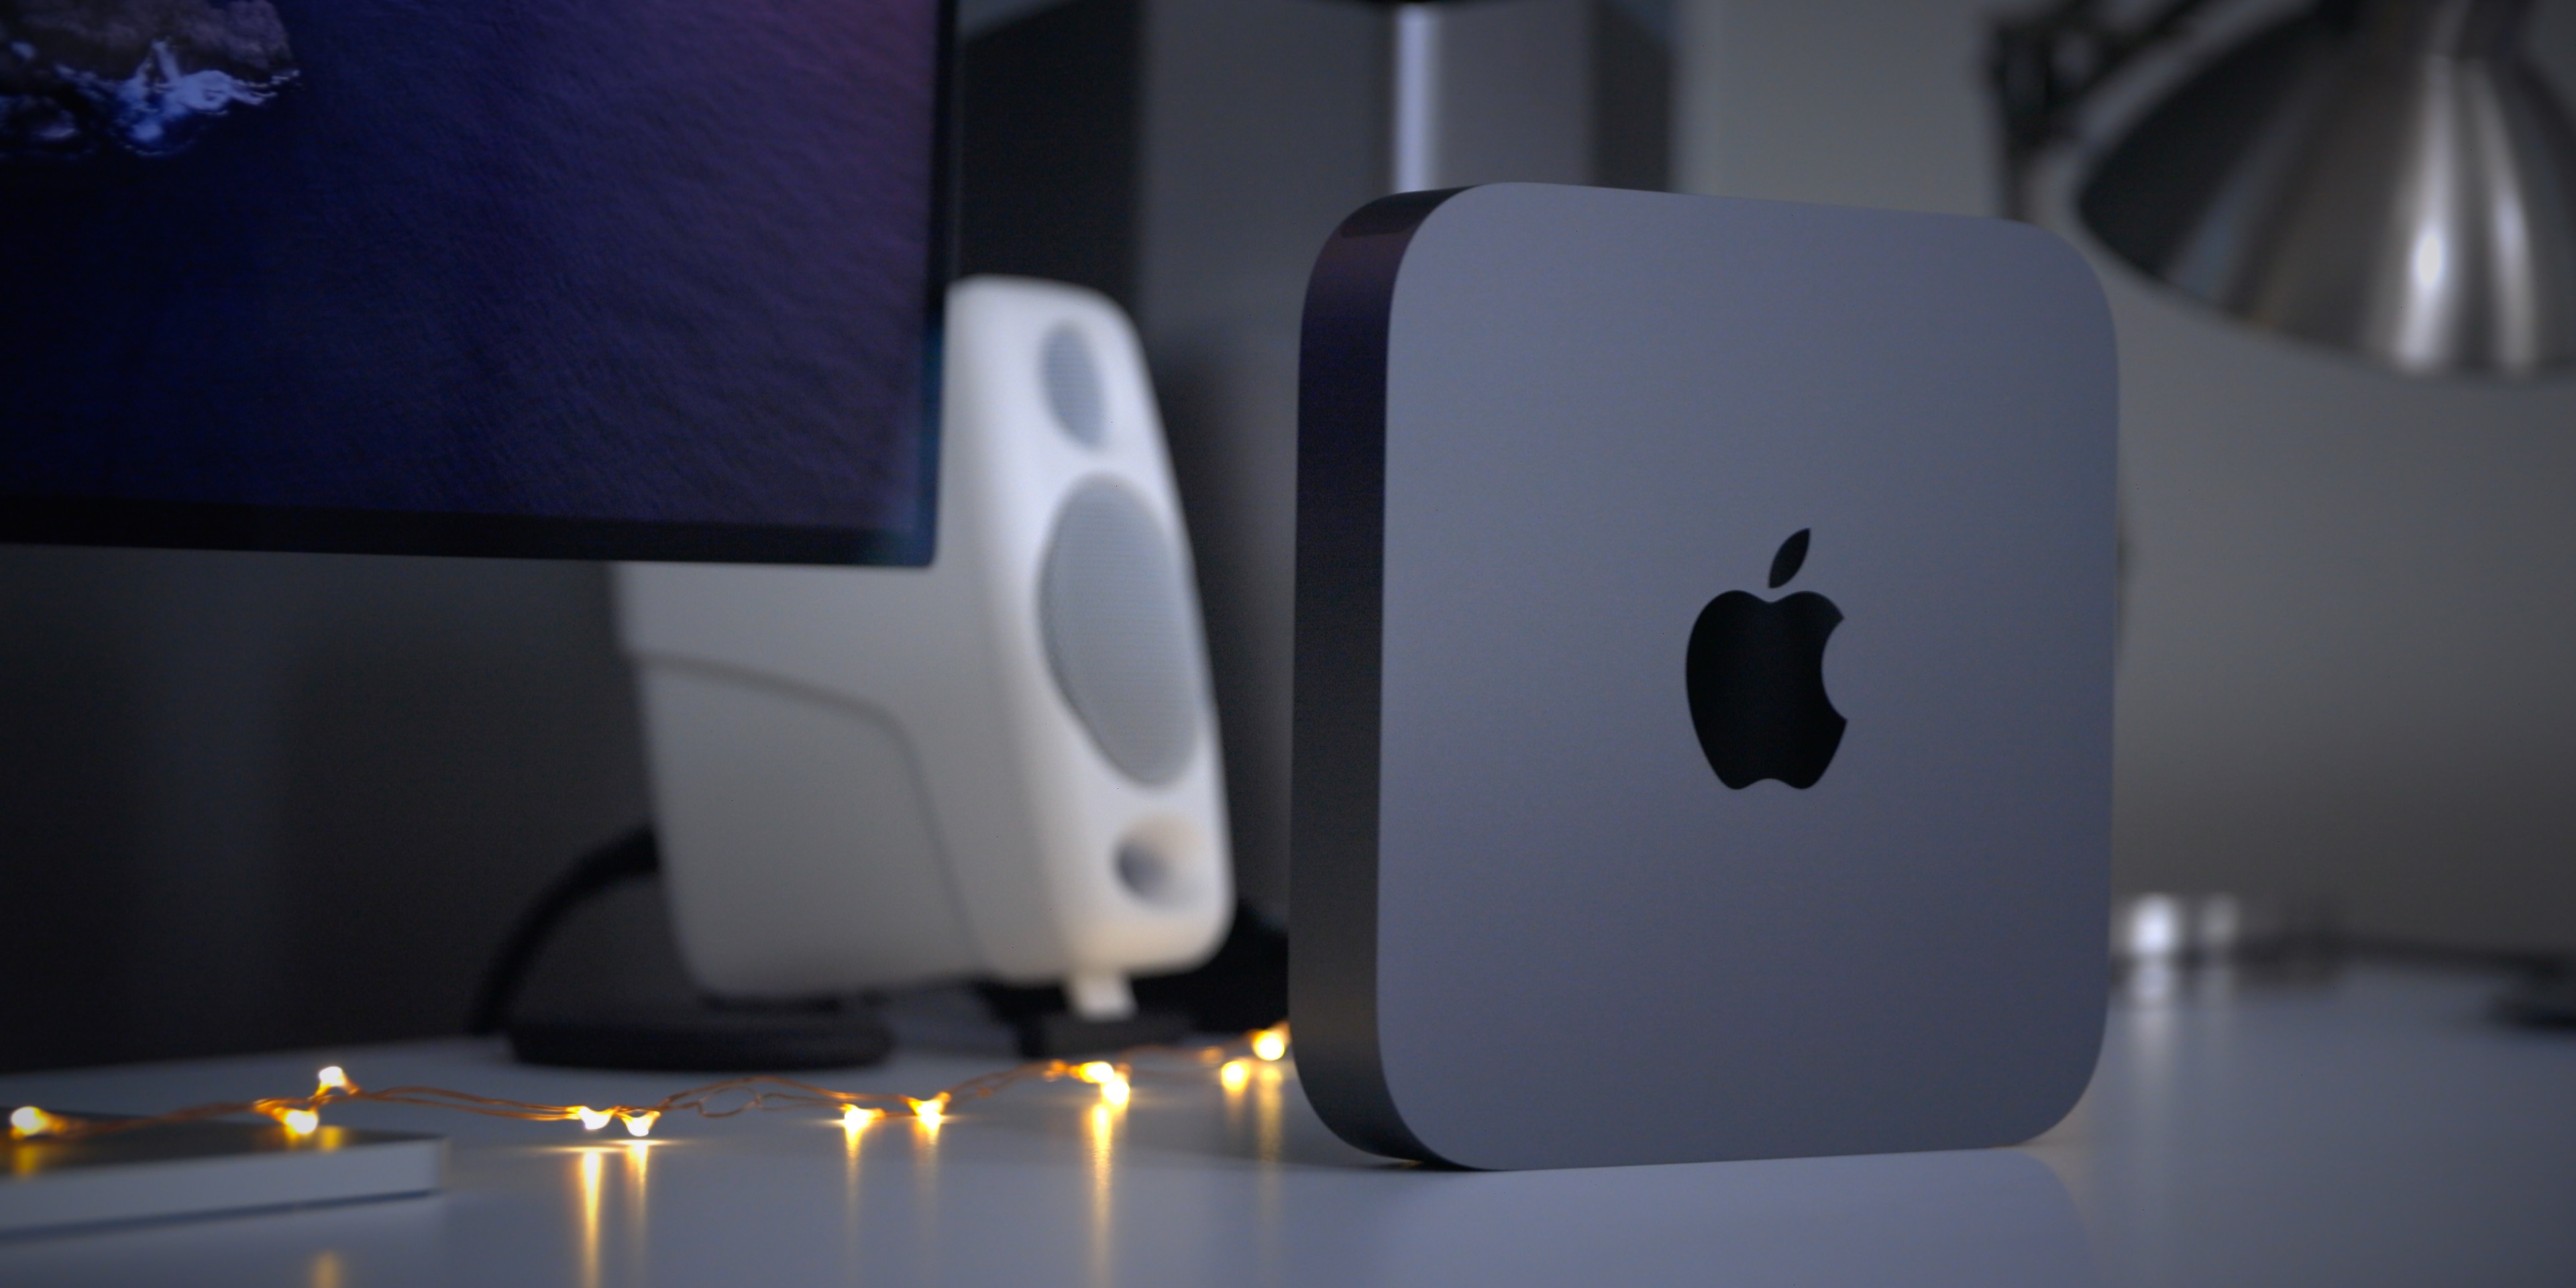 Mac mini: History, specs, pricing, review, and deals - 9to5Mac